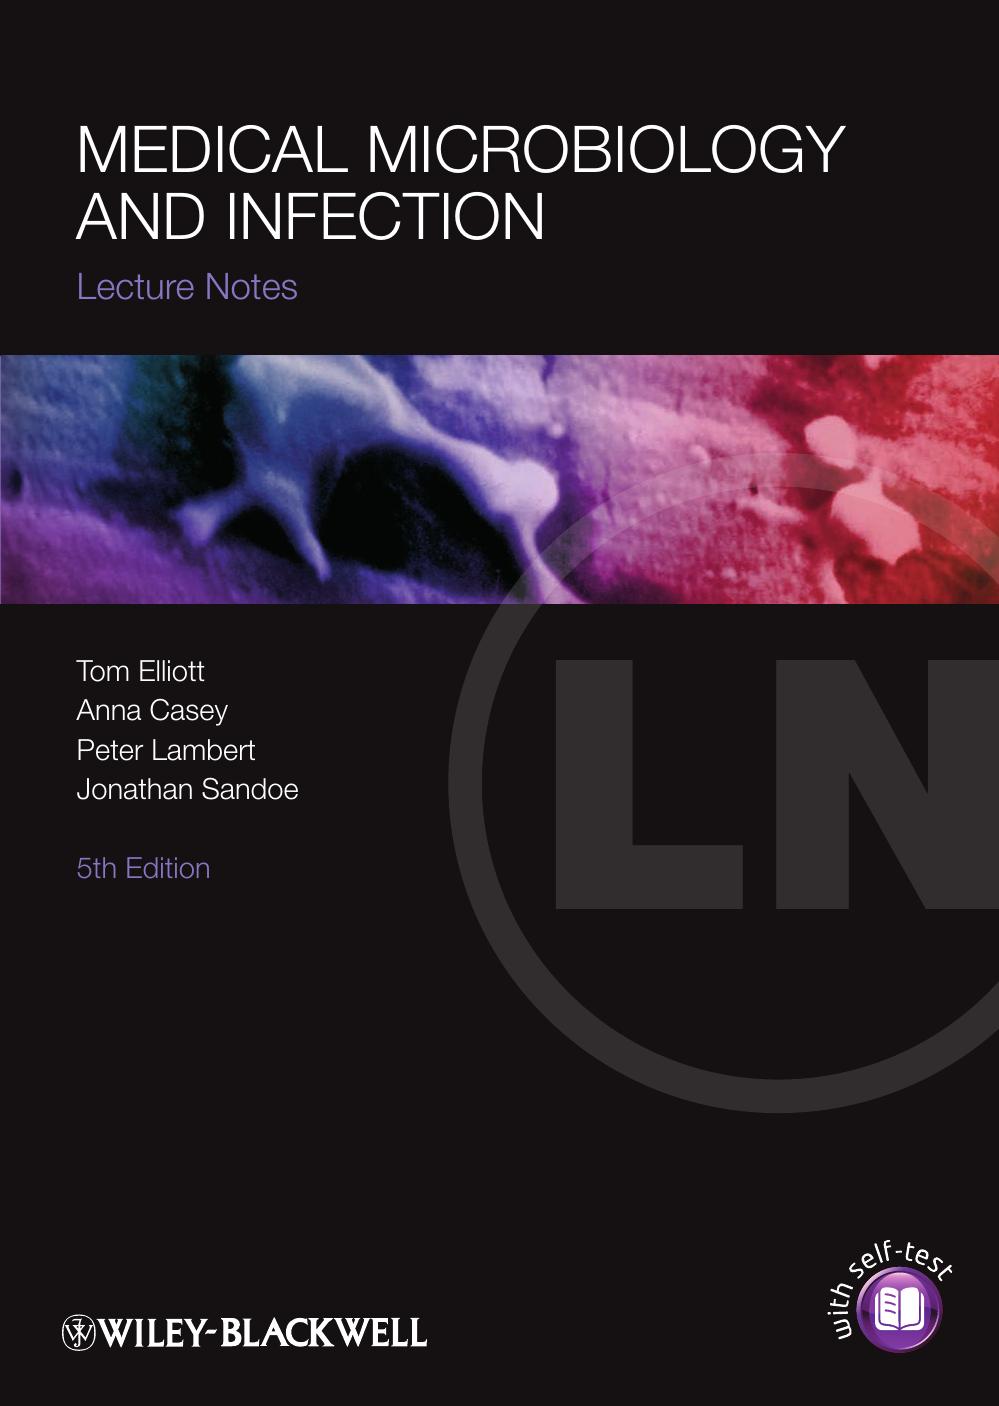 MEDICAL MICROBIOLOGY AND INFECTION: Lecture Notes